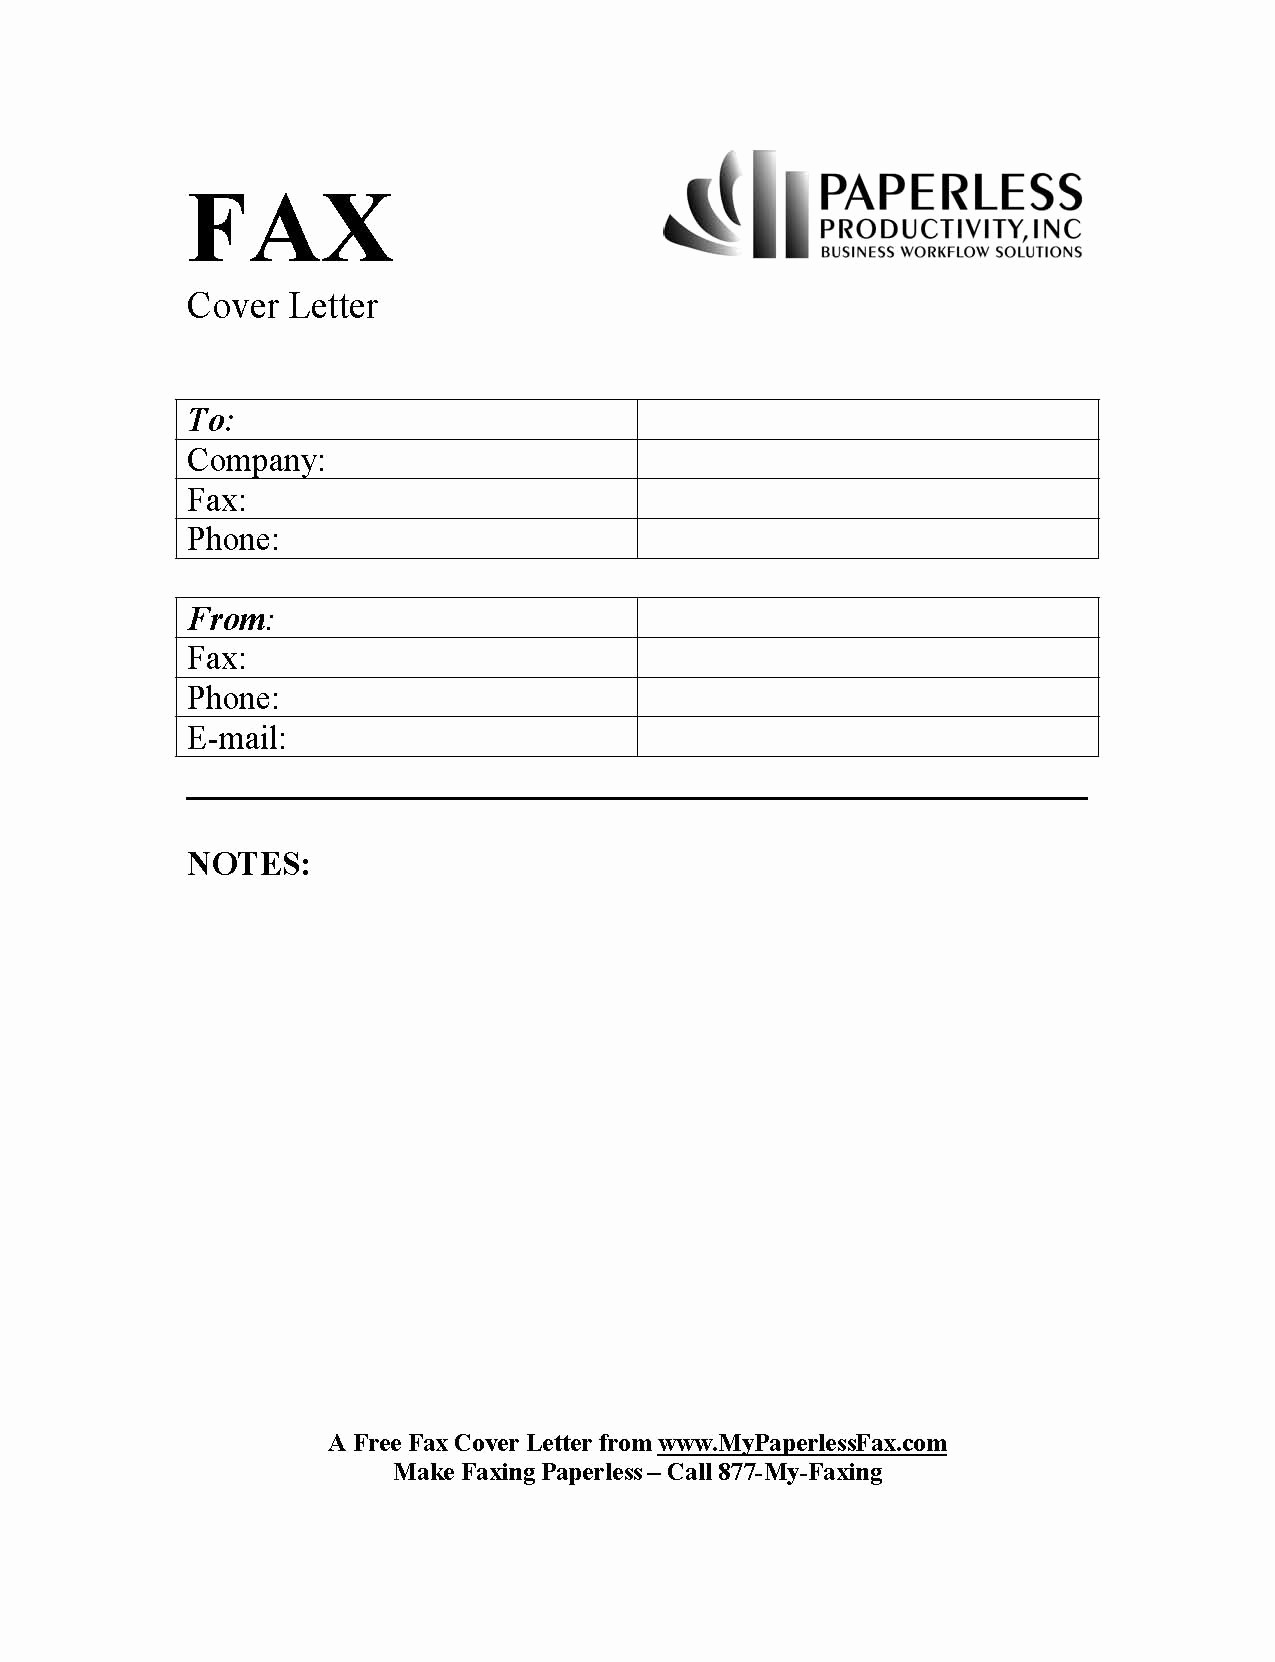 Sample Of Fax Cover Sheets Best Of Blank Fax Cover Letter 2016 Samplebusinessresume